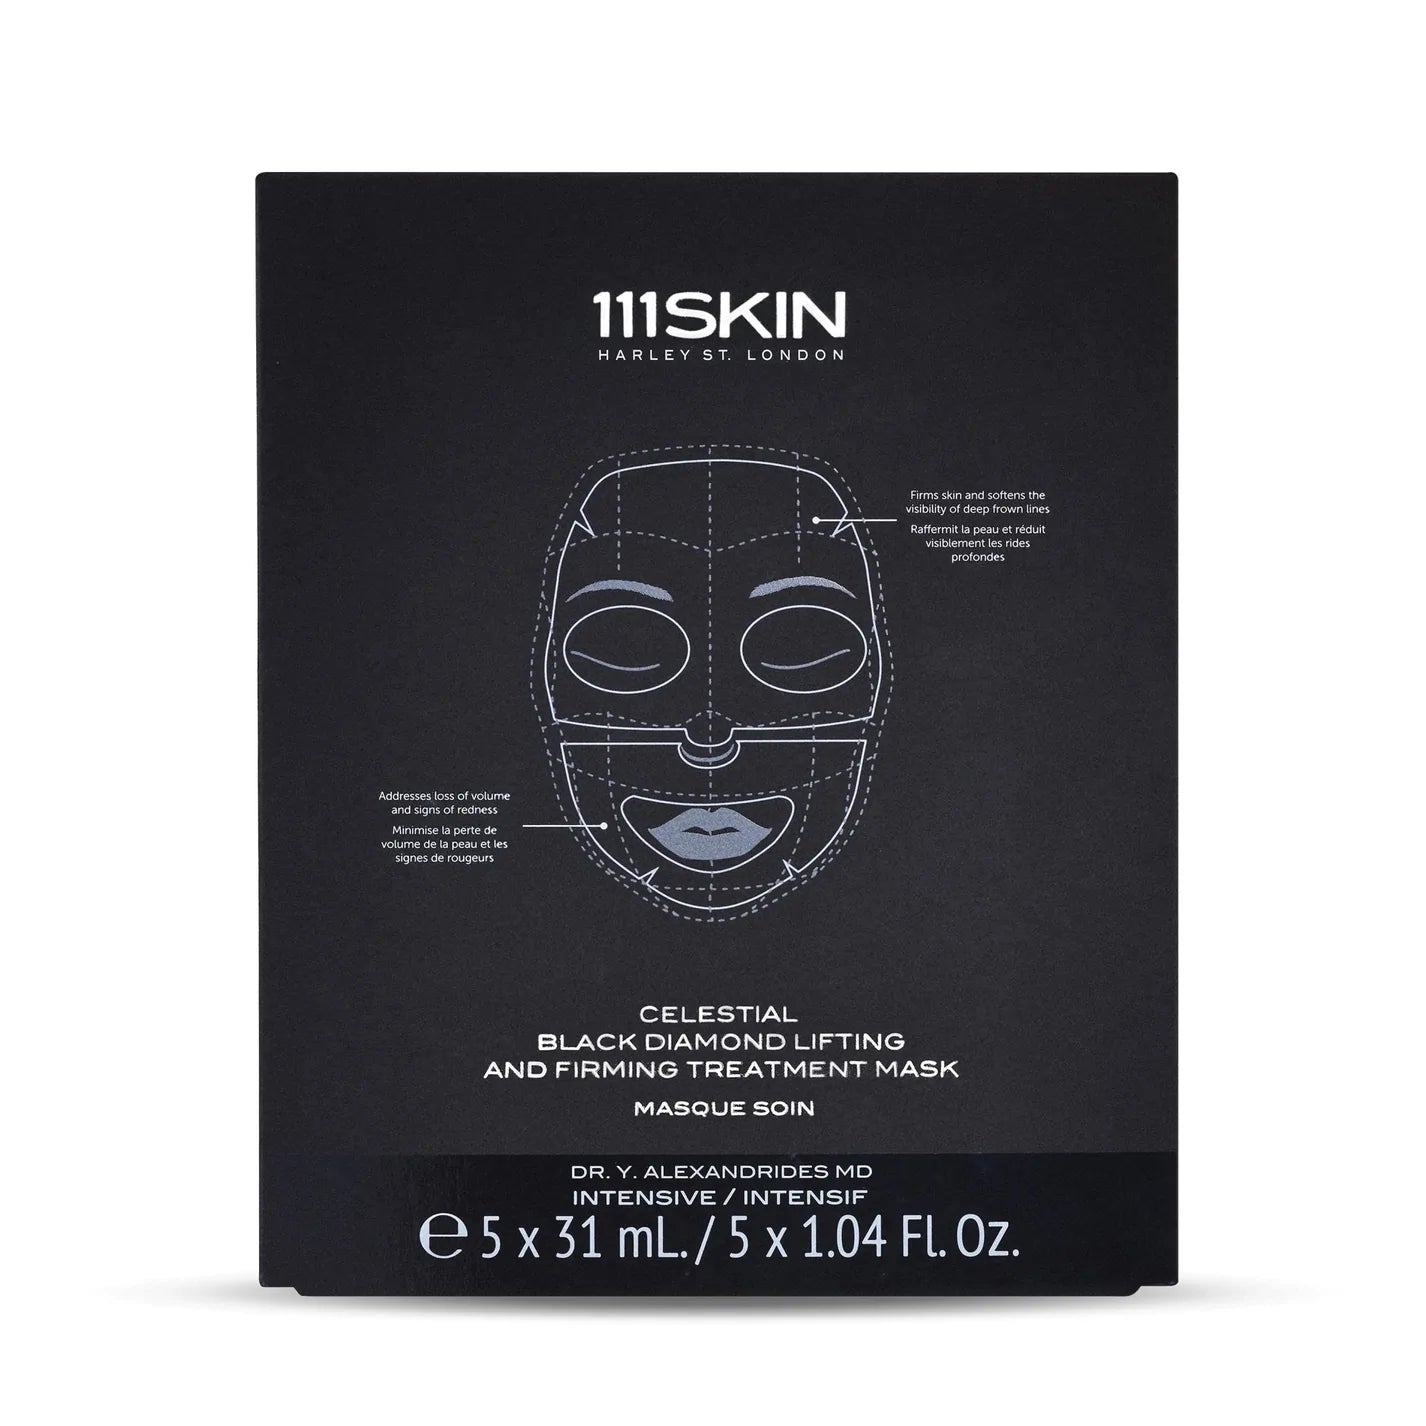 CELESTIAL BLACK DIAMOND LIFTING AND FIRMING FACE MASK -- Box of 5